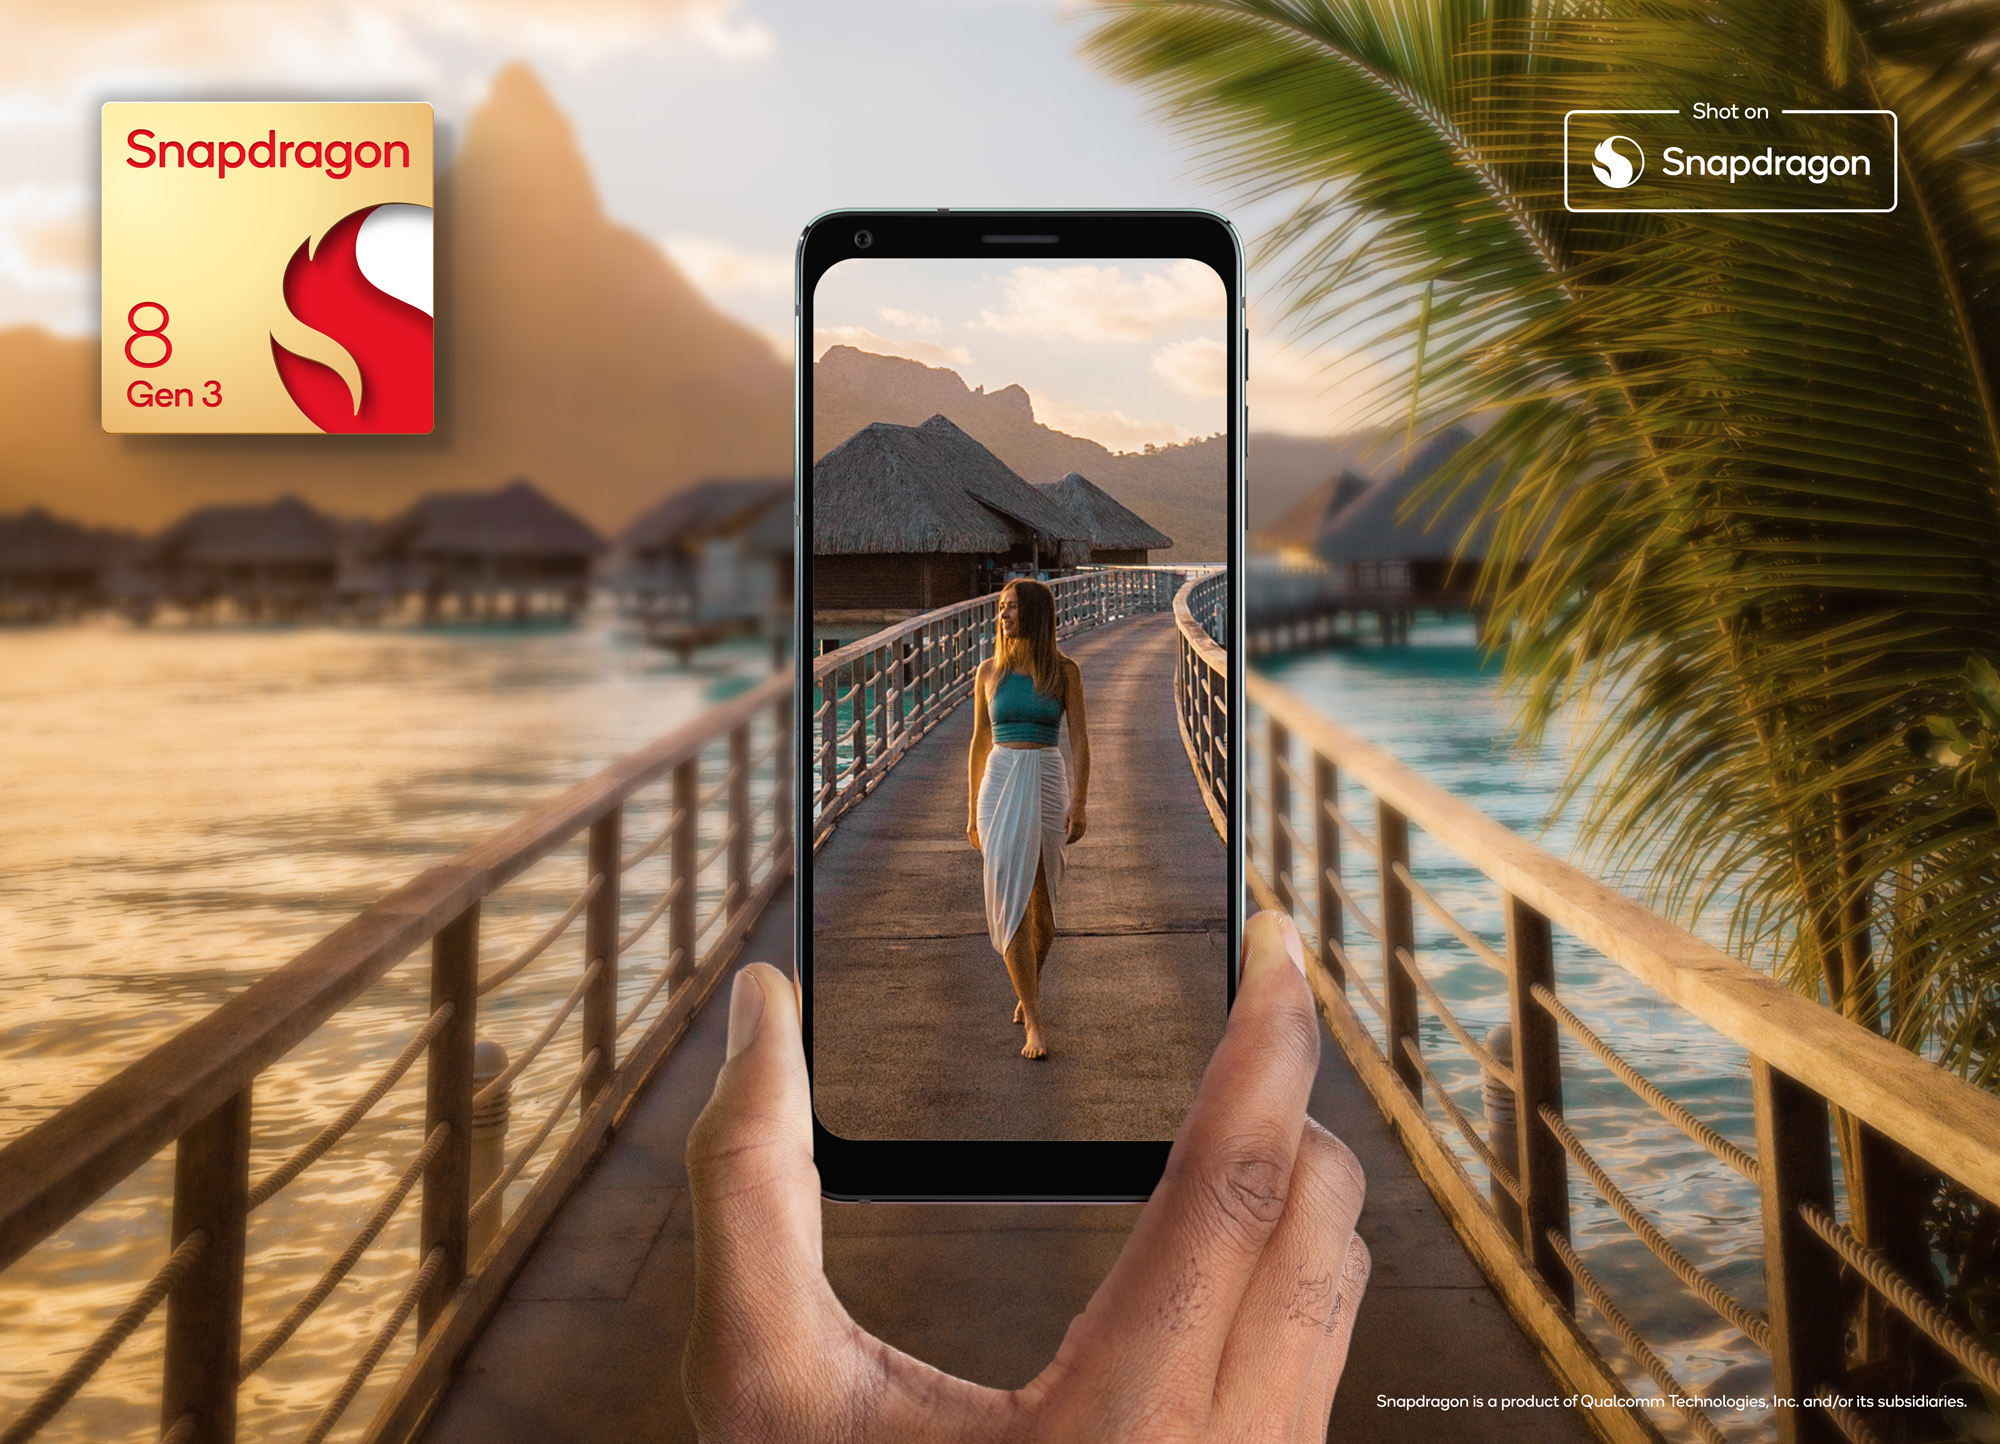 A phone with the Snapdragon 8 Gen 3 is shown taking a picture of a woman on a boardwalk.